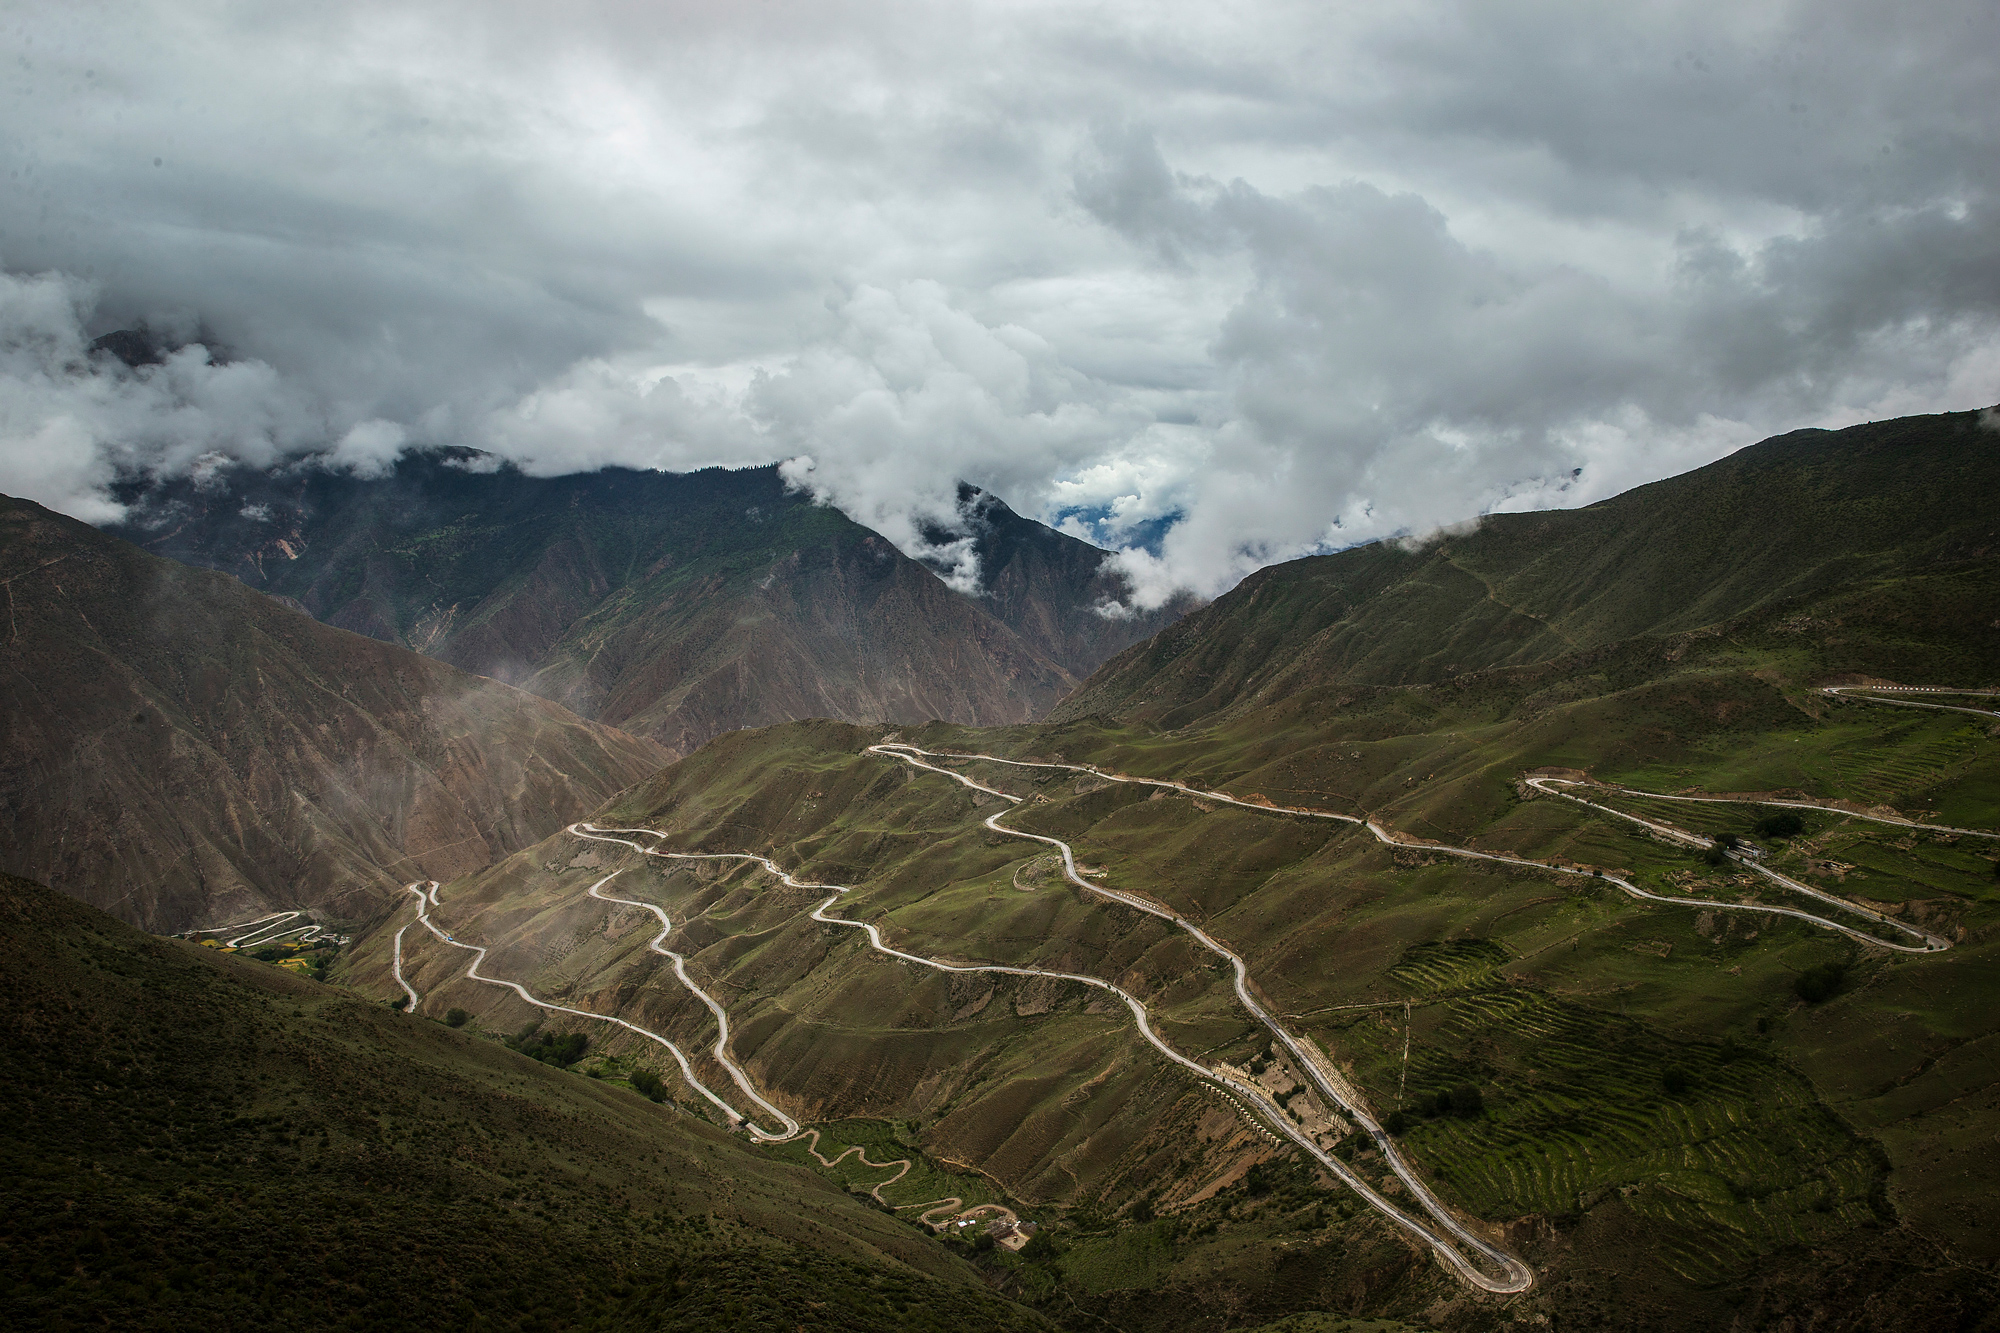 Another challenging location on the route is known as the Nu River 72 Turns, a series of treacherous switchbacks in Qamdo, where the road climbs from 13,451 feet above sea level to a high point of 15,259 feet, before dropping back down to 10,170 feet, July 29.